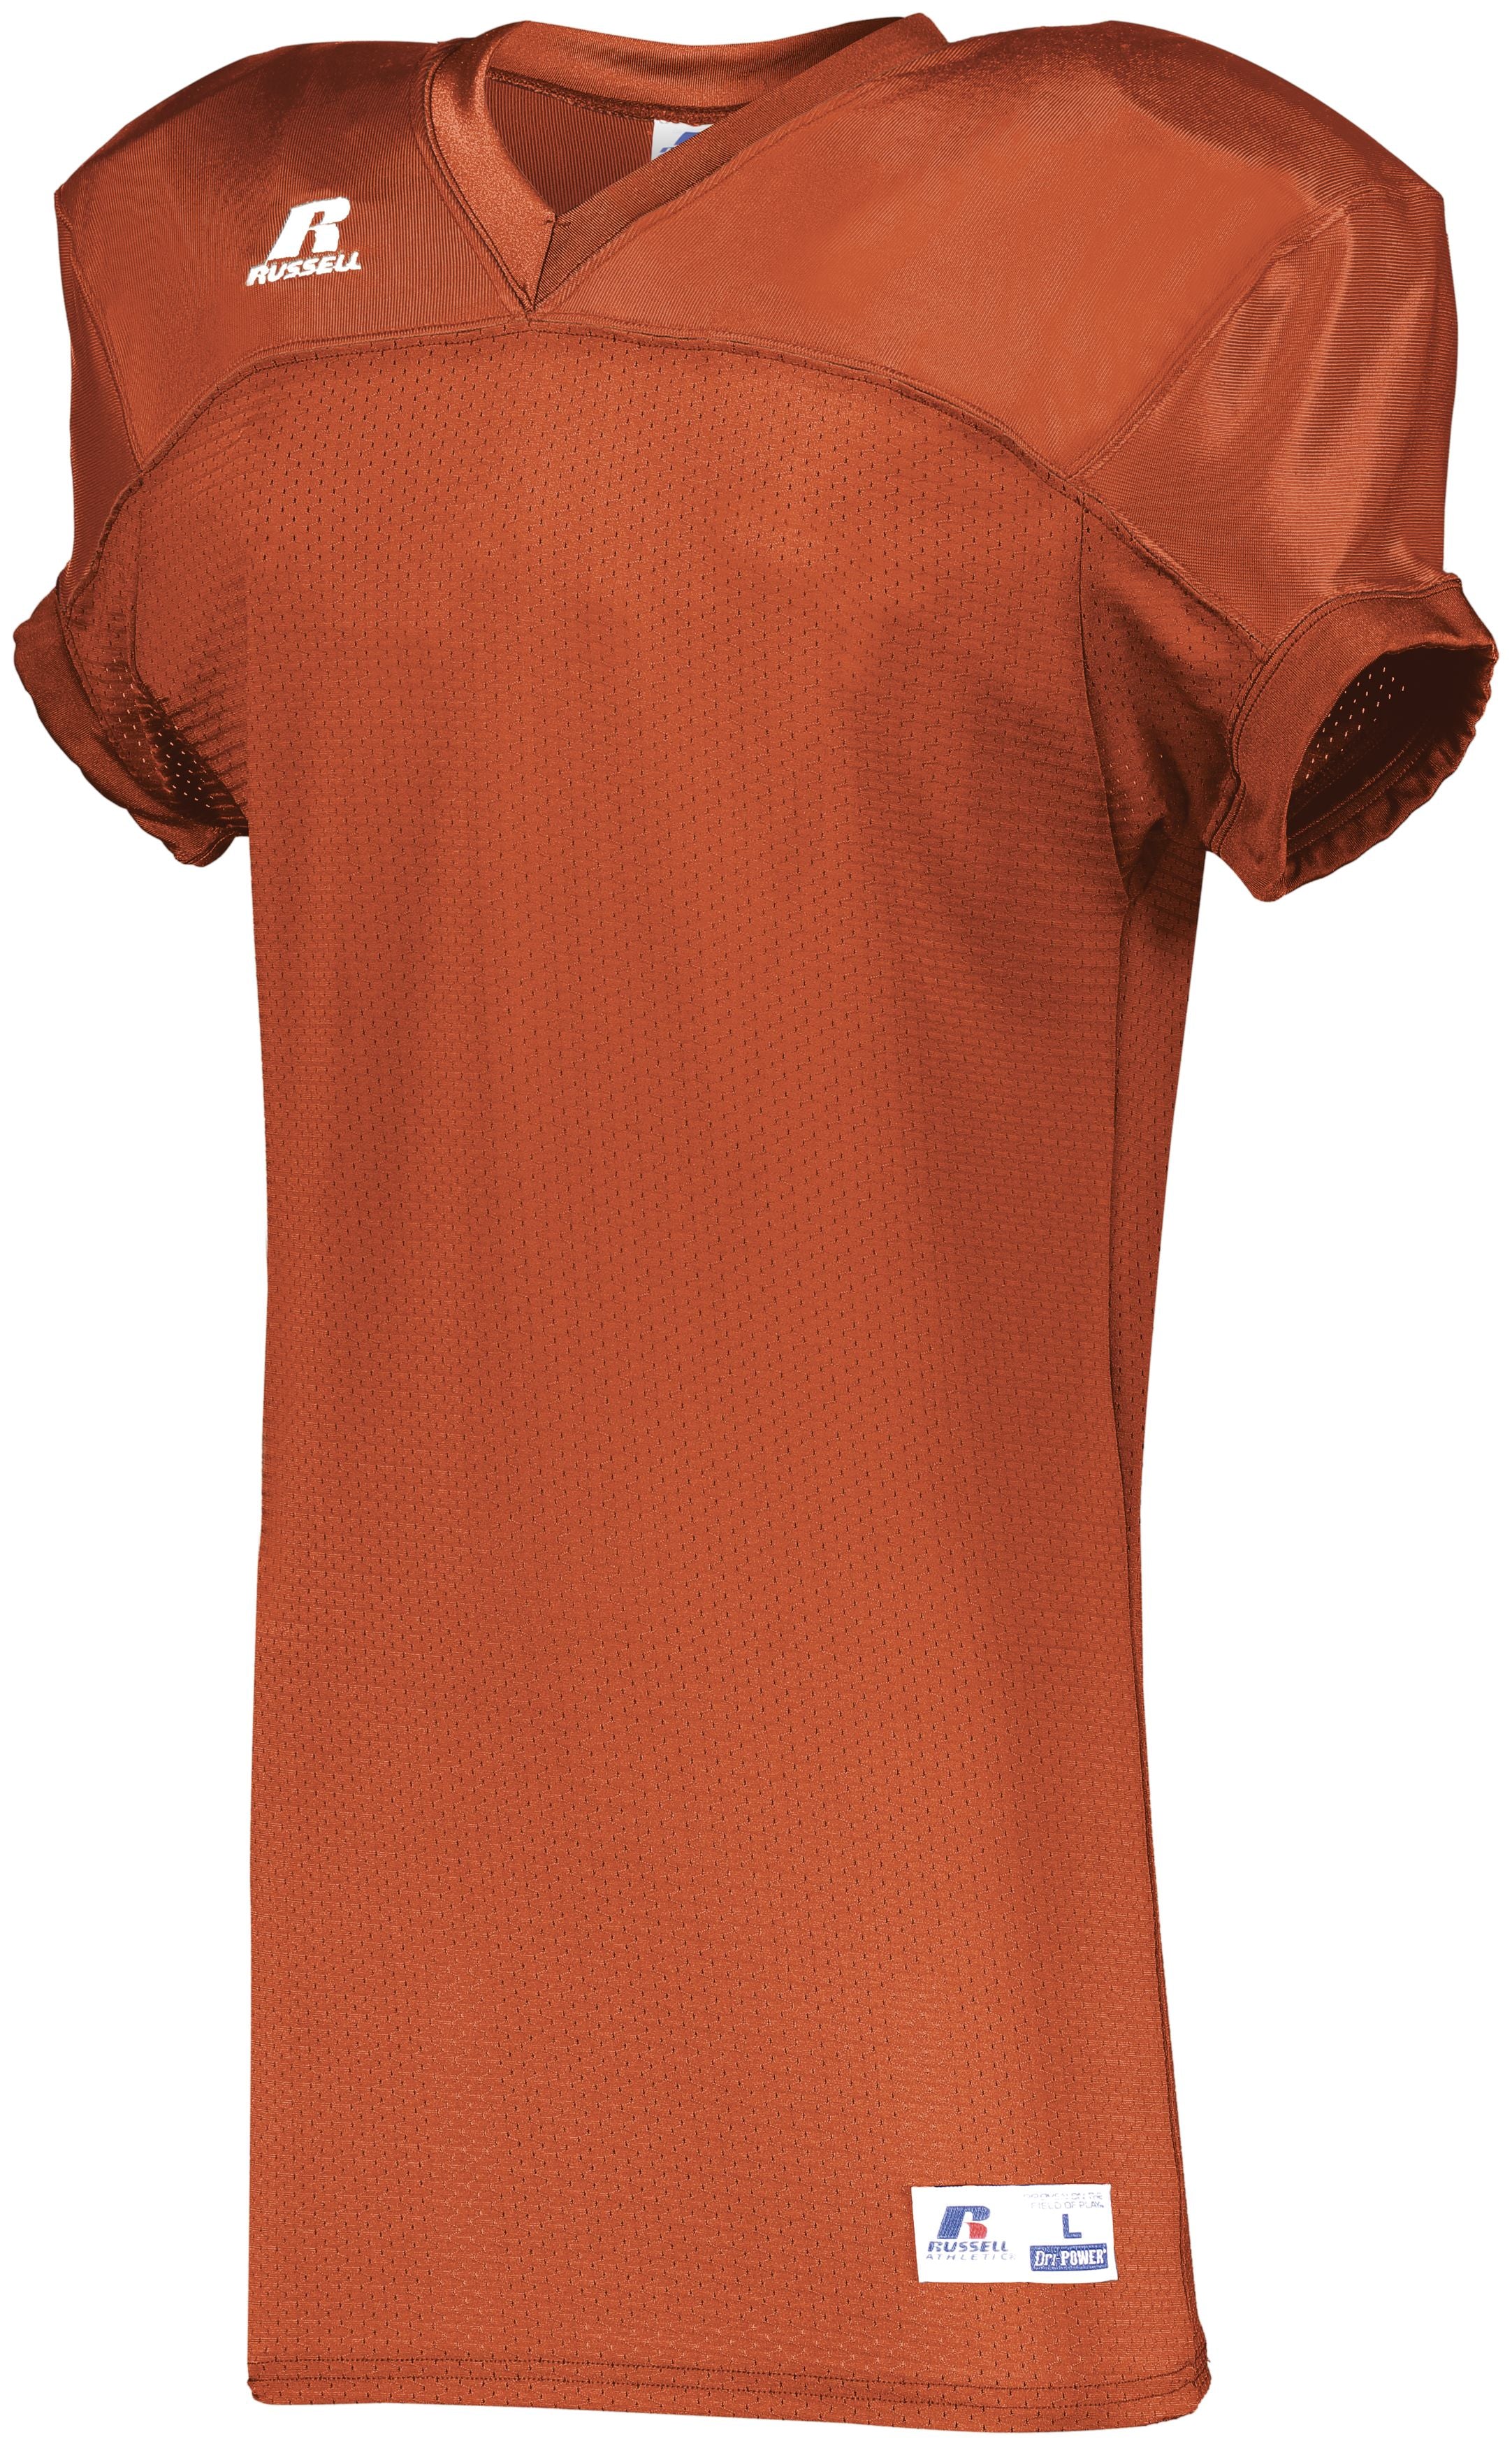 Russell Athletic Stretch Mesh Game Jersey in Burnt Orange  -Part of the Adult, Adult-Jersey, Football, Russell-Athletic-Products, Shirts, All-Sports, All-Sports-1 product lines at KanaleyCreations.com